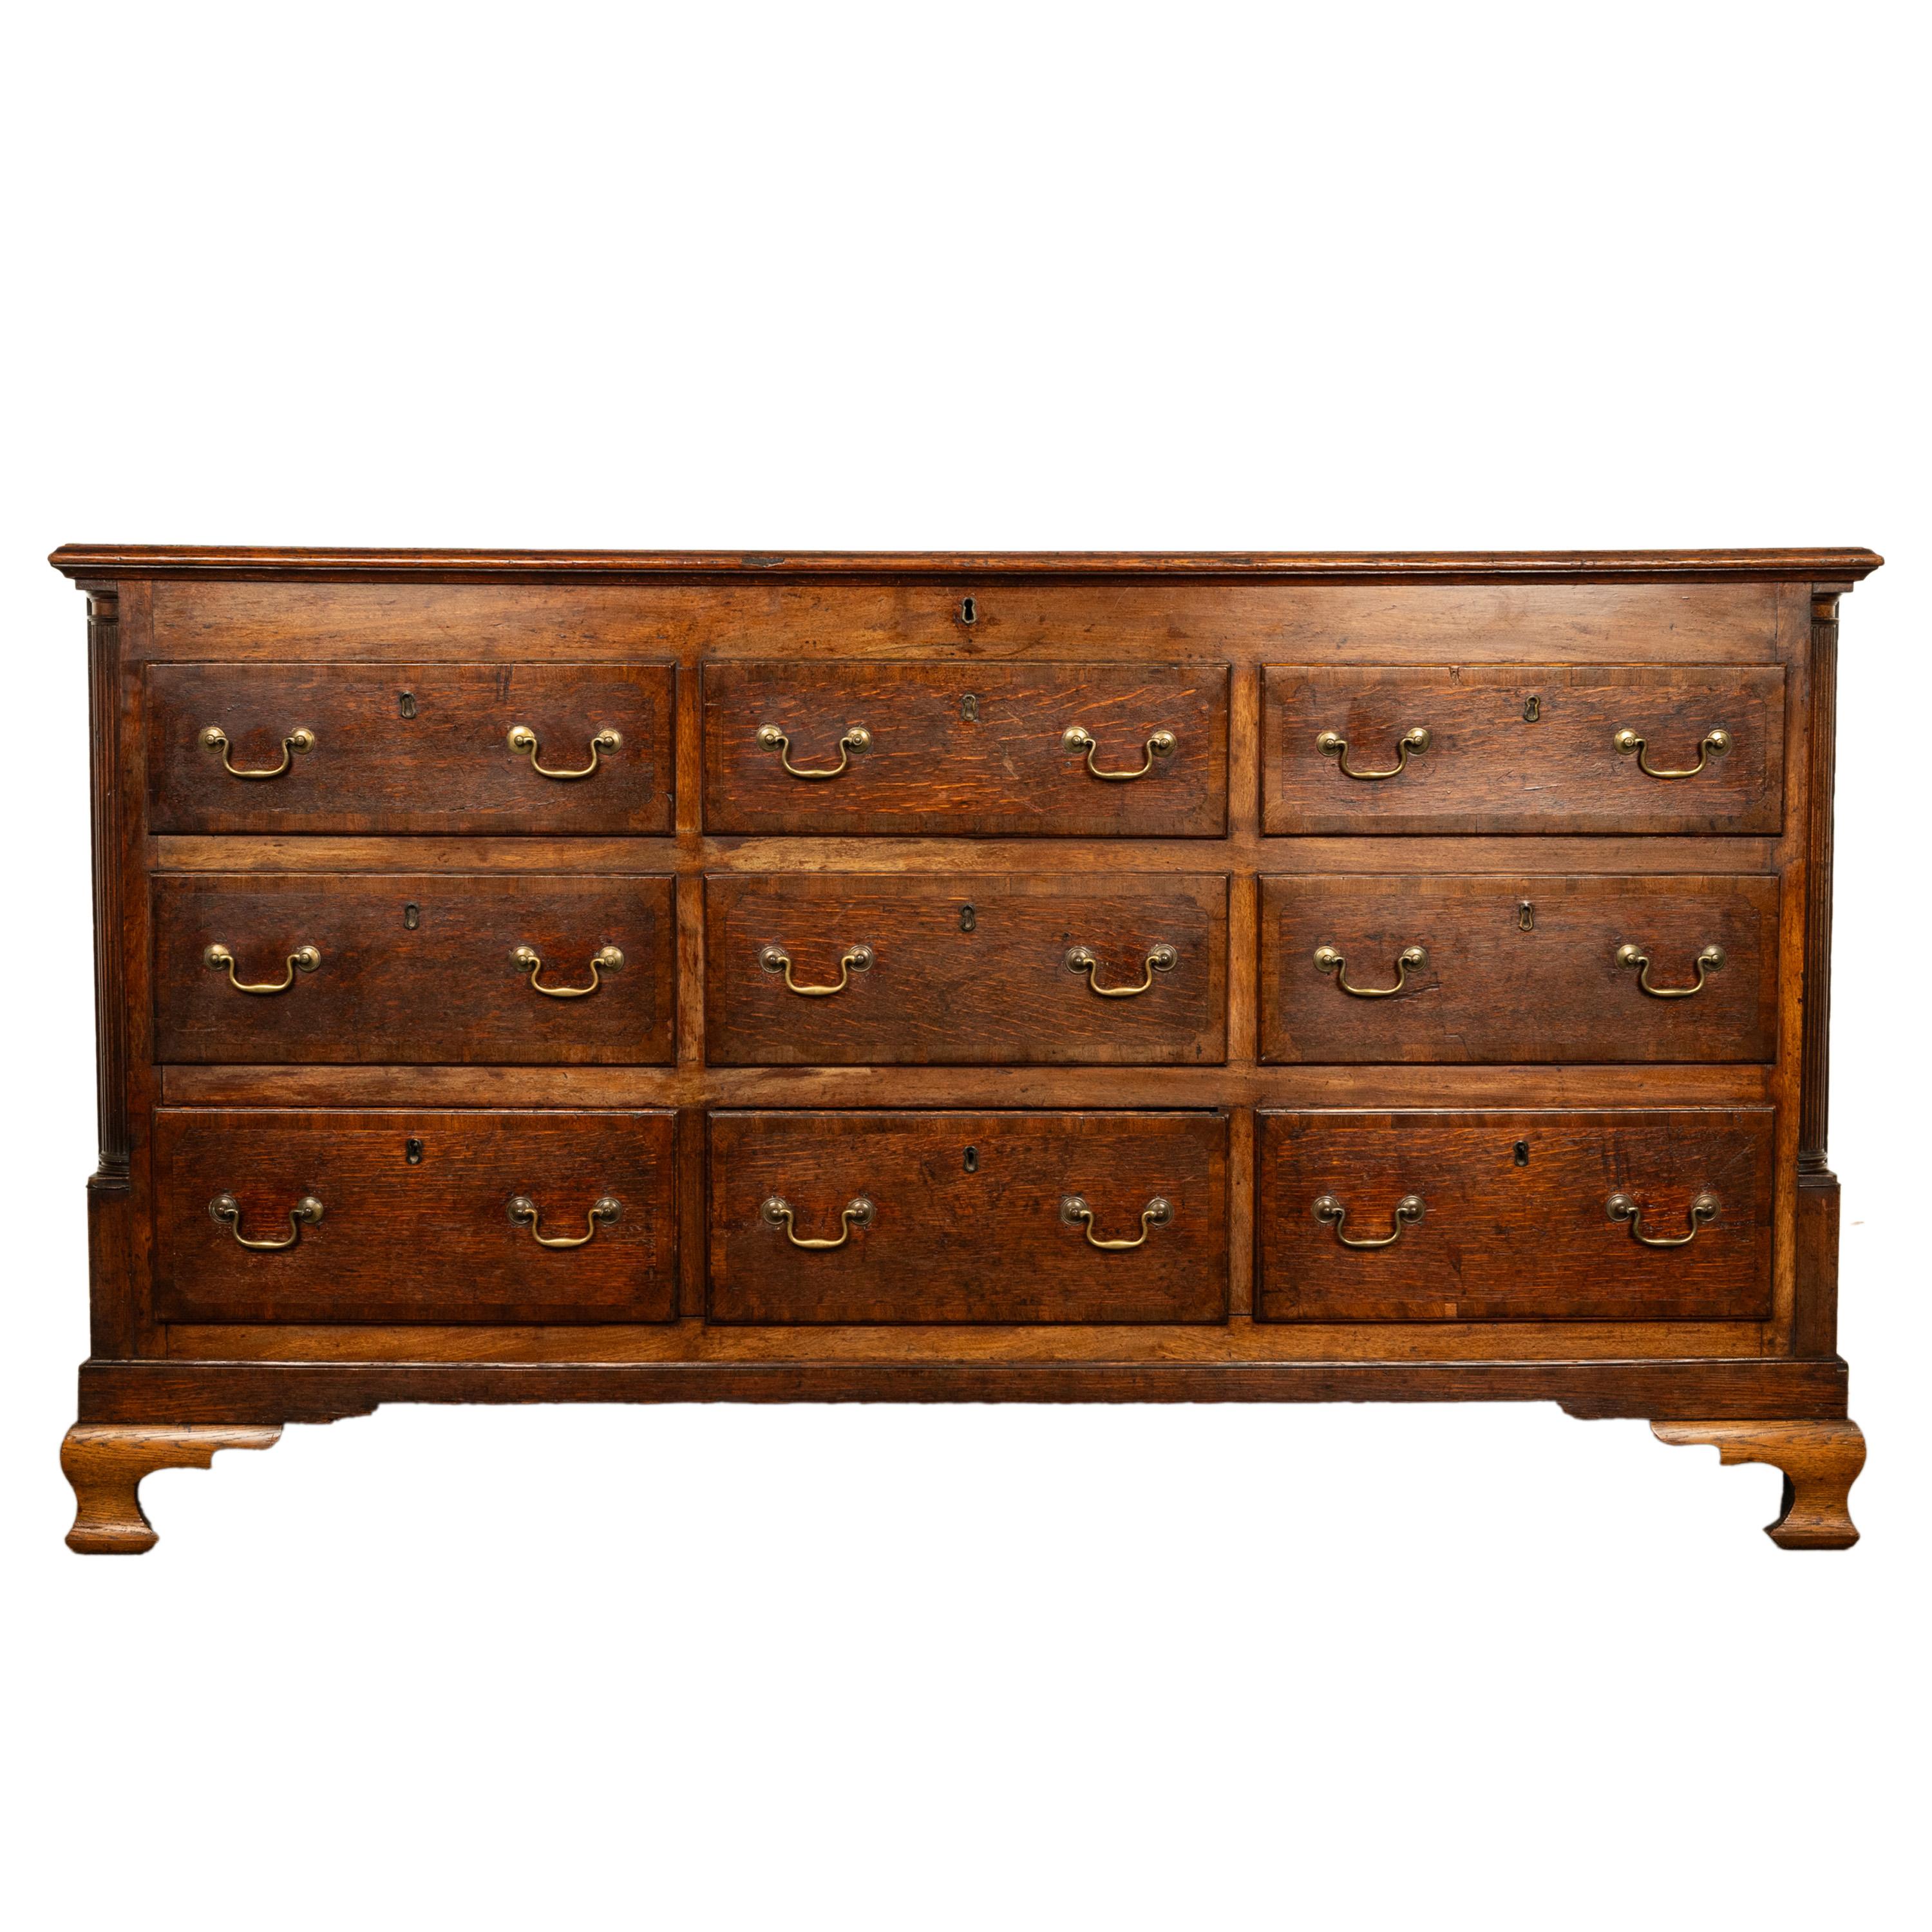 A good & large antique Lancashire country oak mule chest, coffer, sideboard, circa 1770.
The chest having a hinged top enclosing a large storage area for bedding and clothing or? The two top banks of drawers are dummy drawers and the bottom three